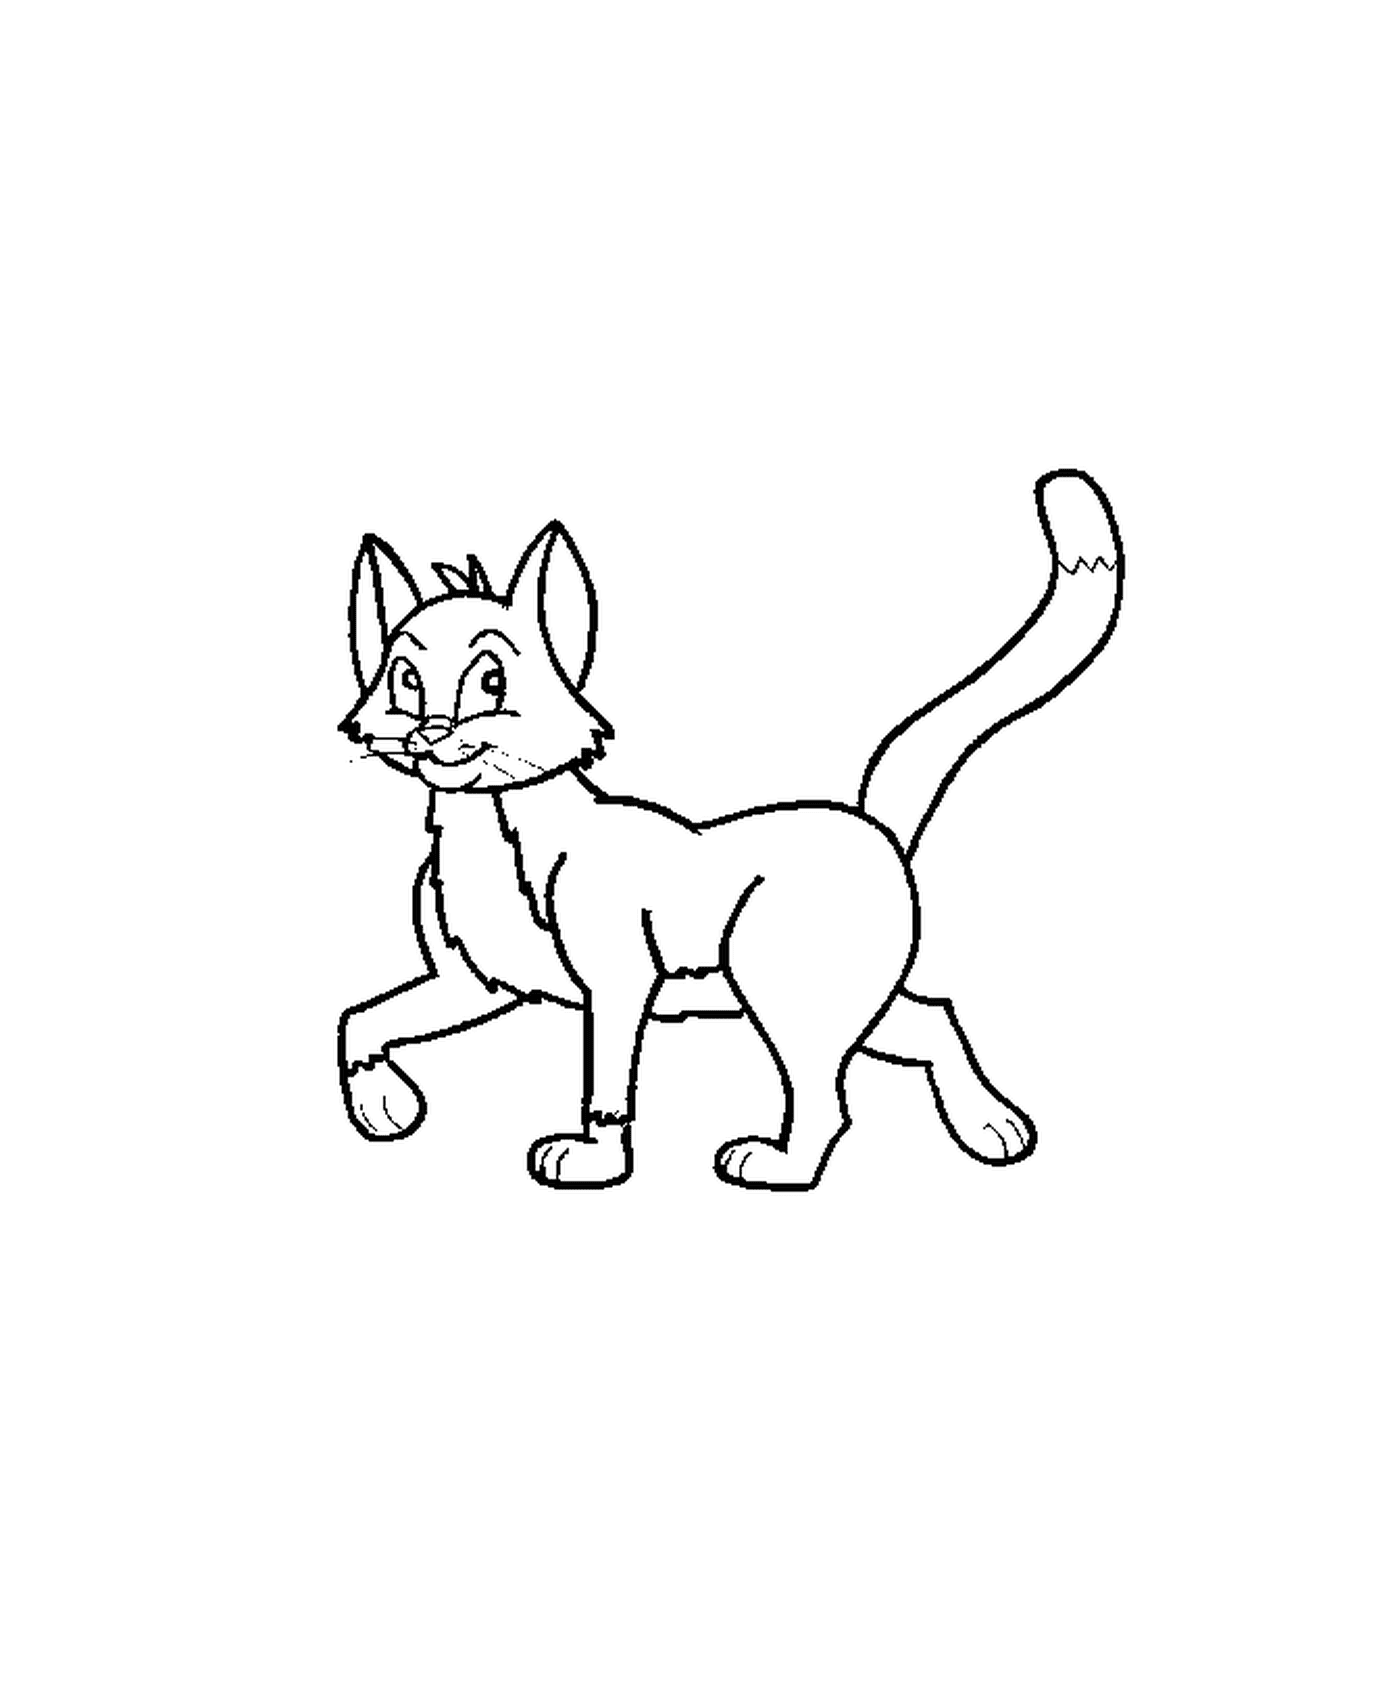 coloriage dessin animaux chat